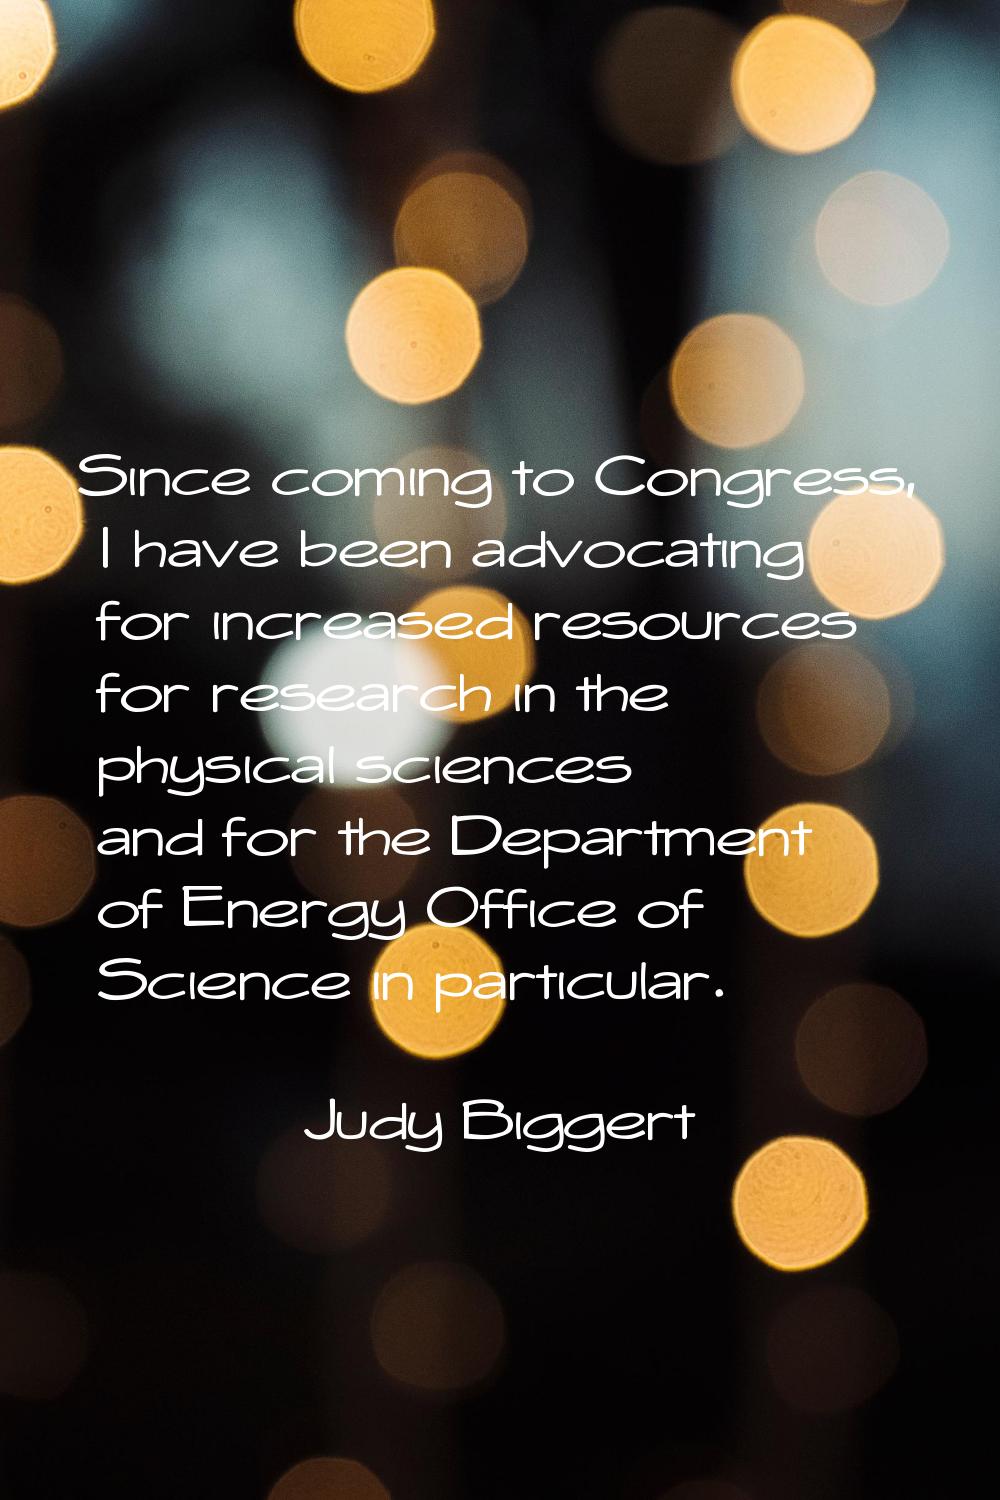 Since coming to Congress, I have been advocating for increased resources for research in the physic